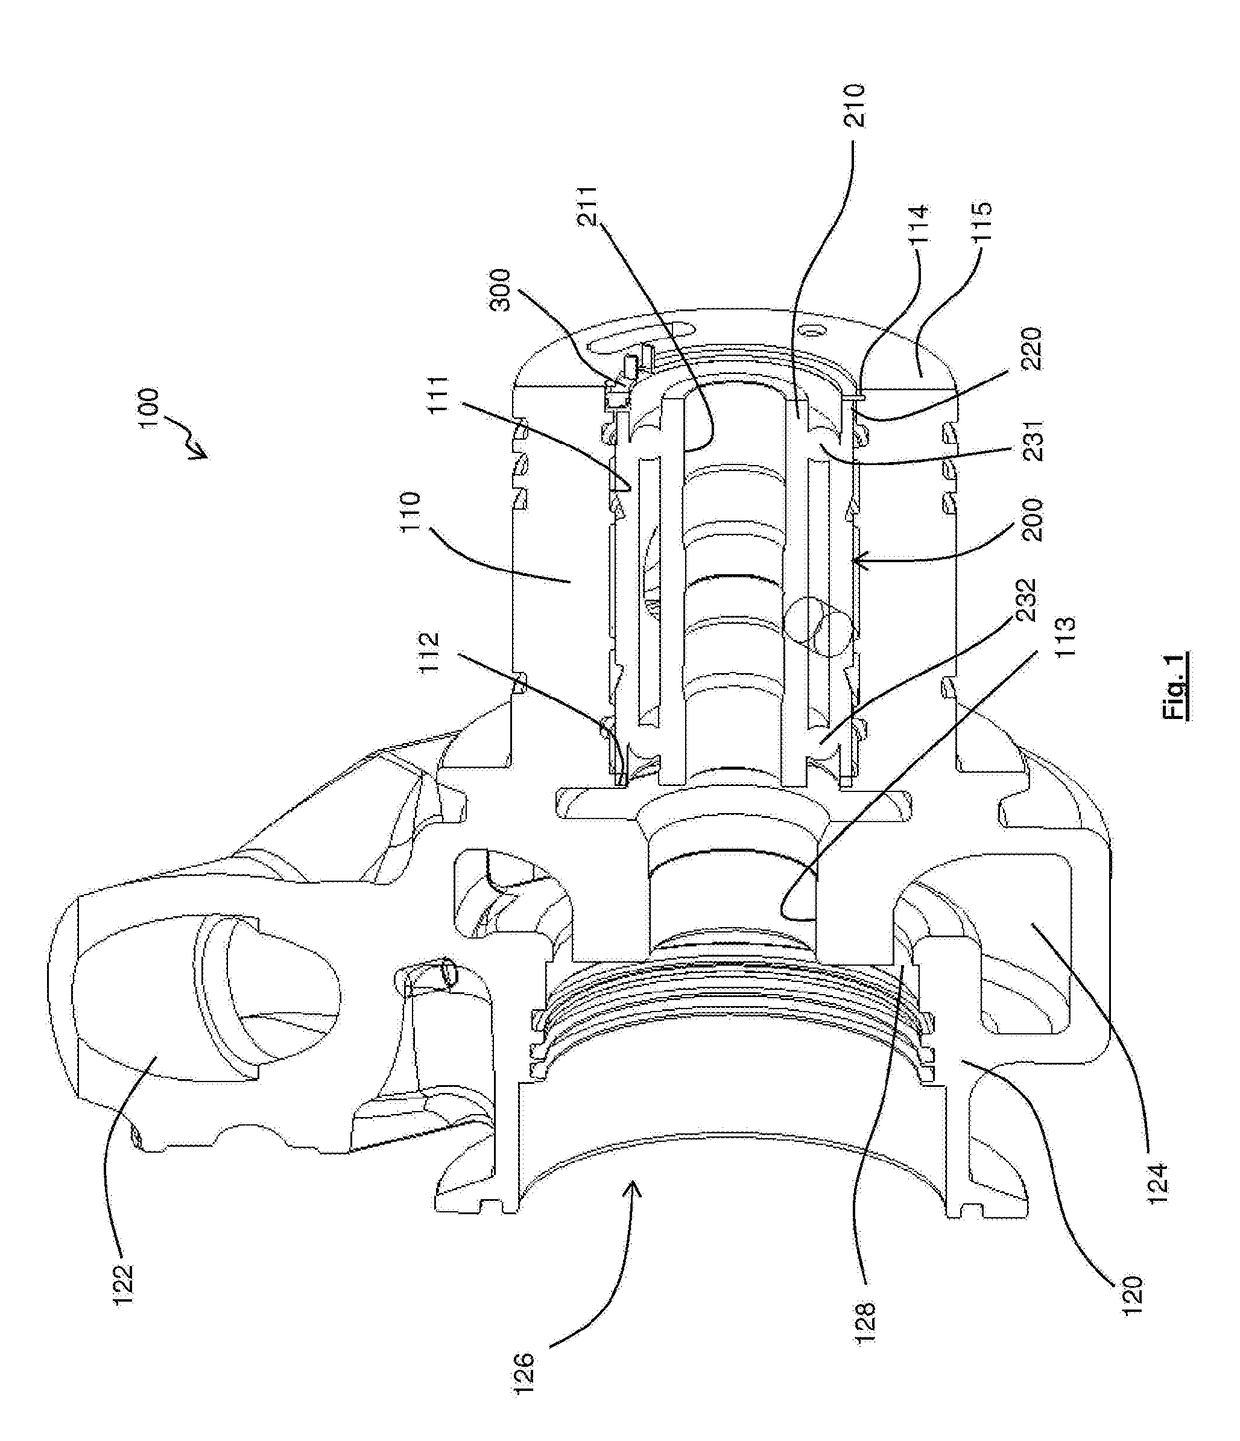 Anti-rotation device and assembly